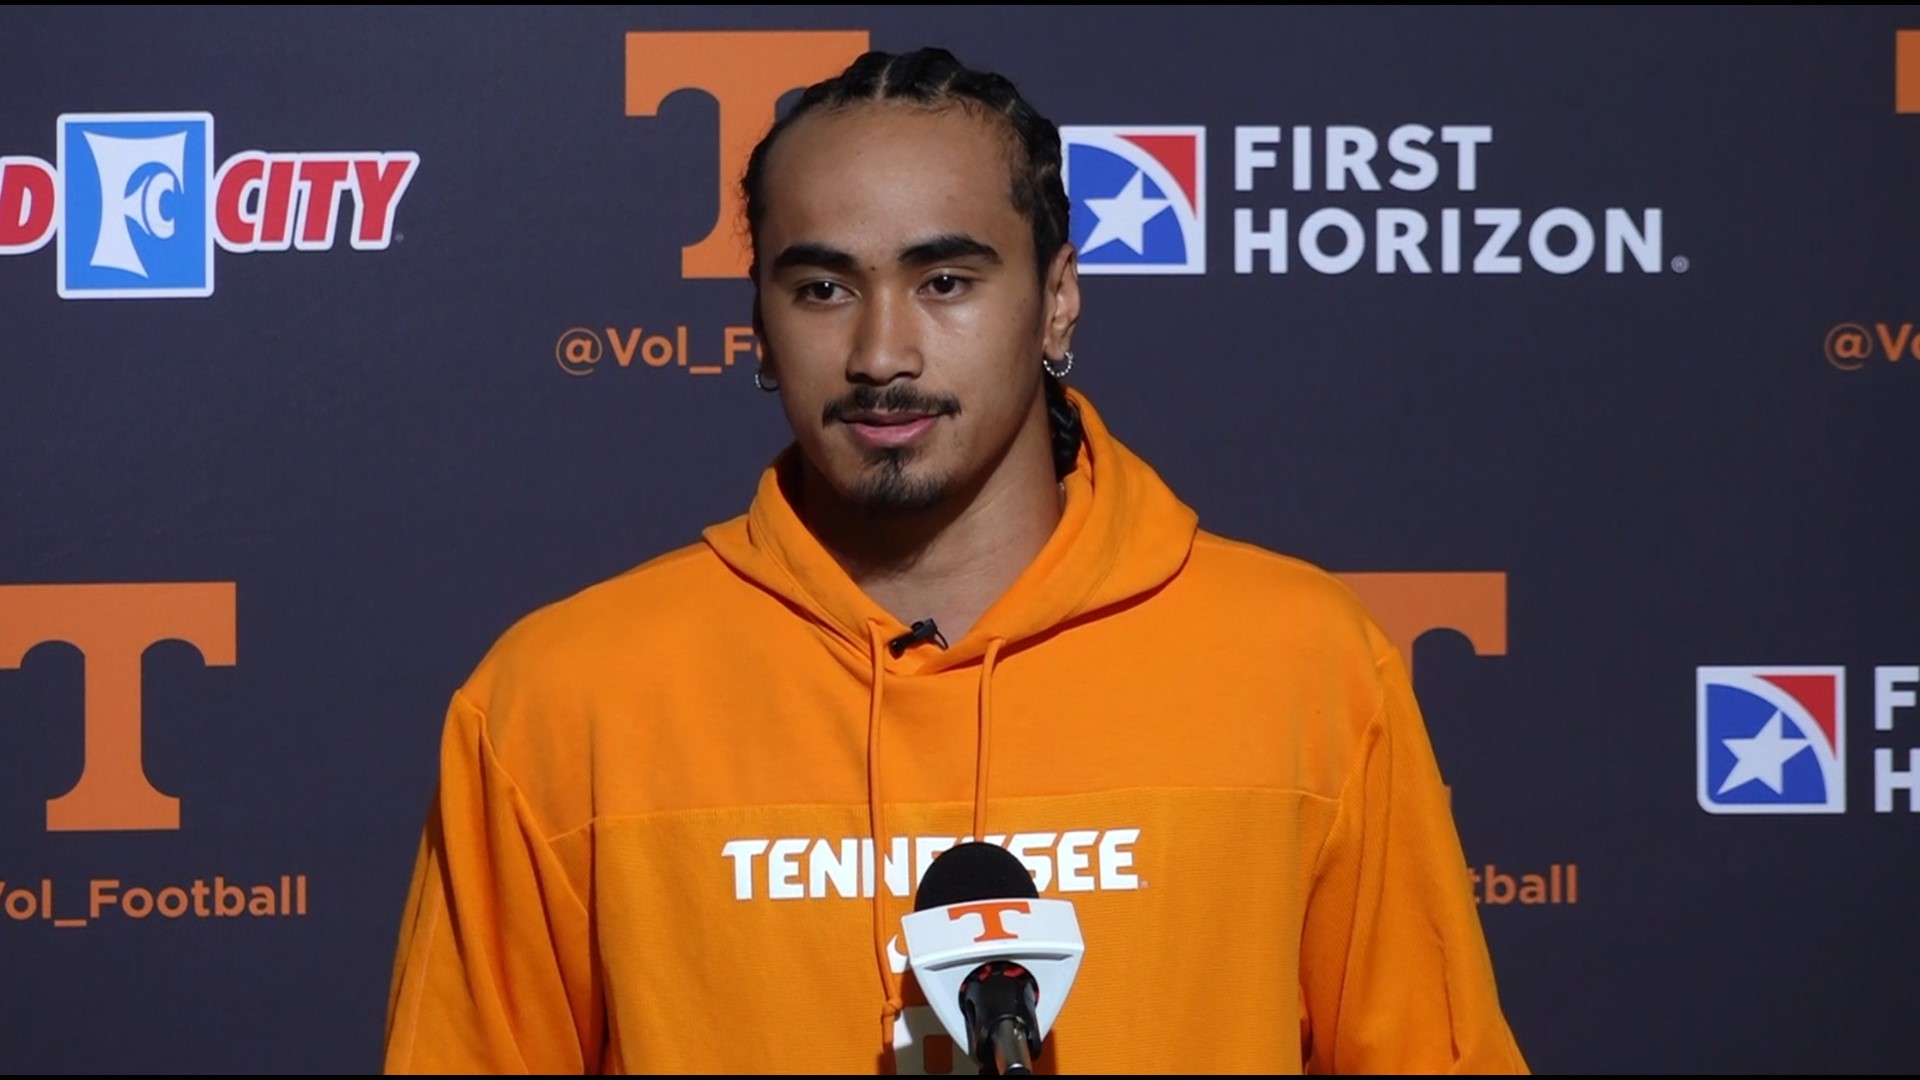 Iamaleava thanked UT officials and head coach Josh Hepuel for the support.